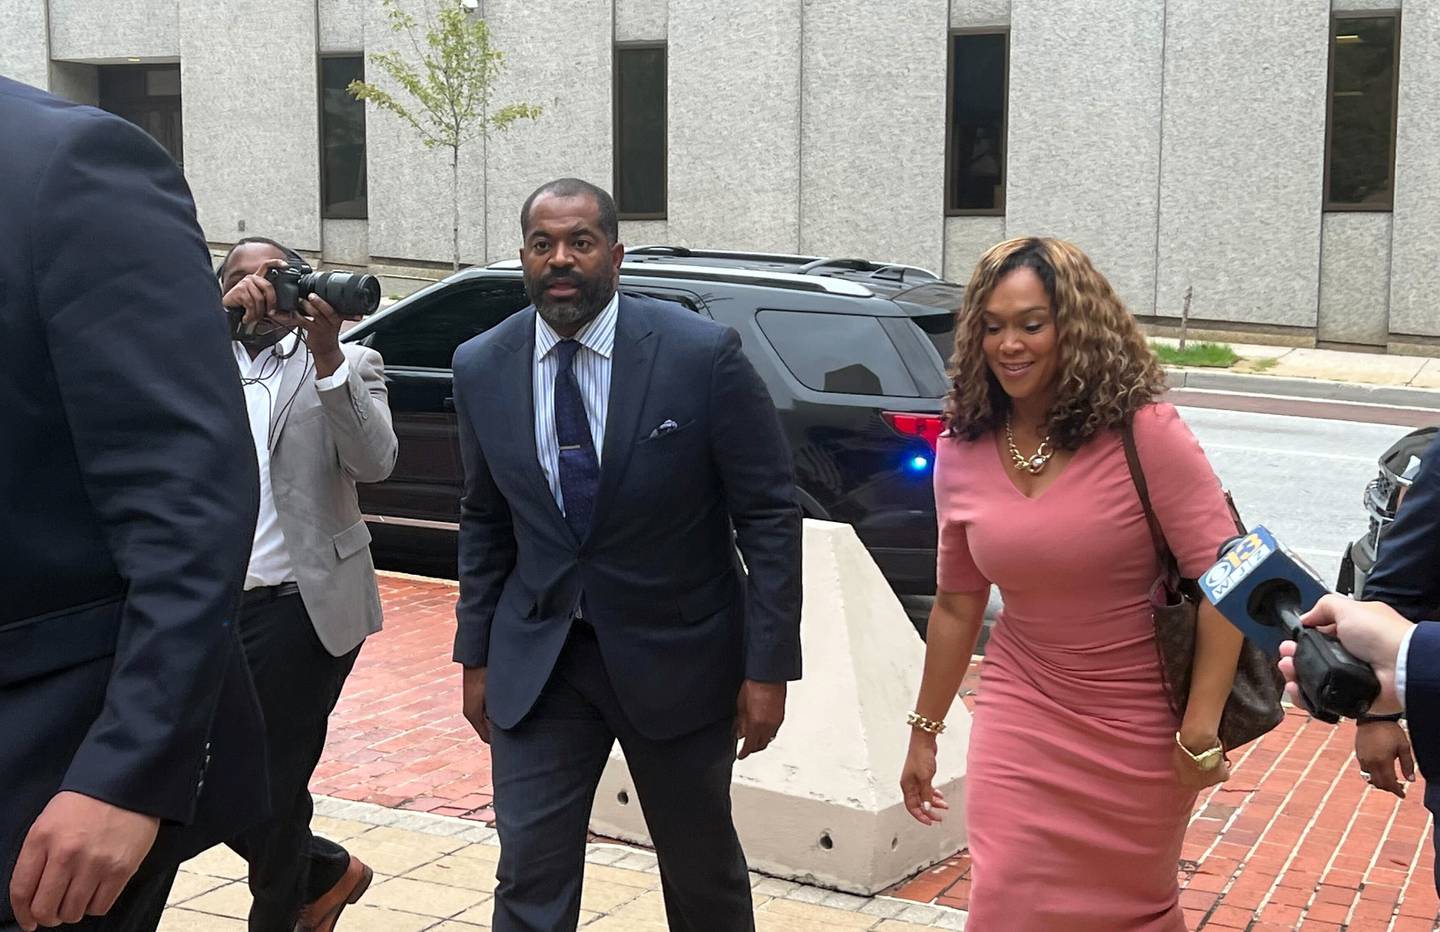 Marilyn Mosby and her husband Nick attend a hearing ahead of her federal trial on perjury charges later this month.